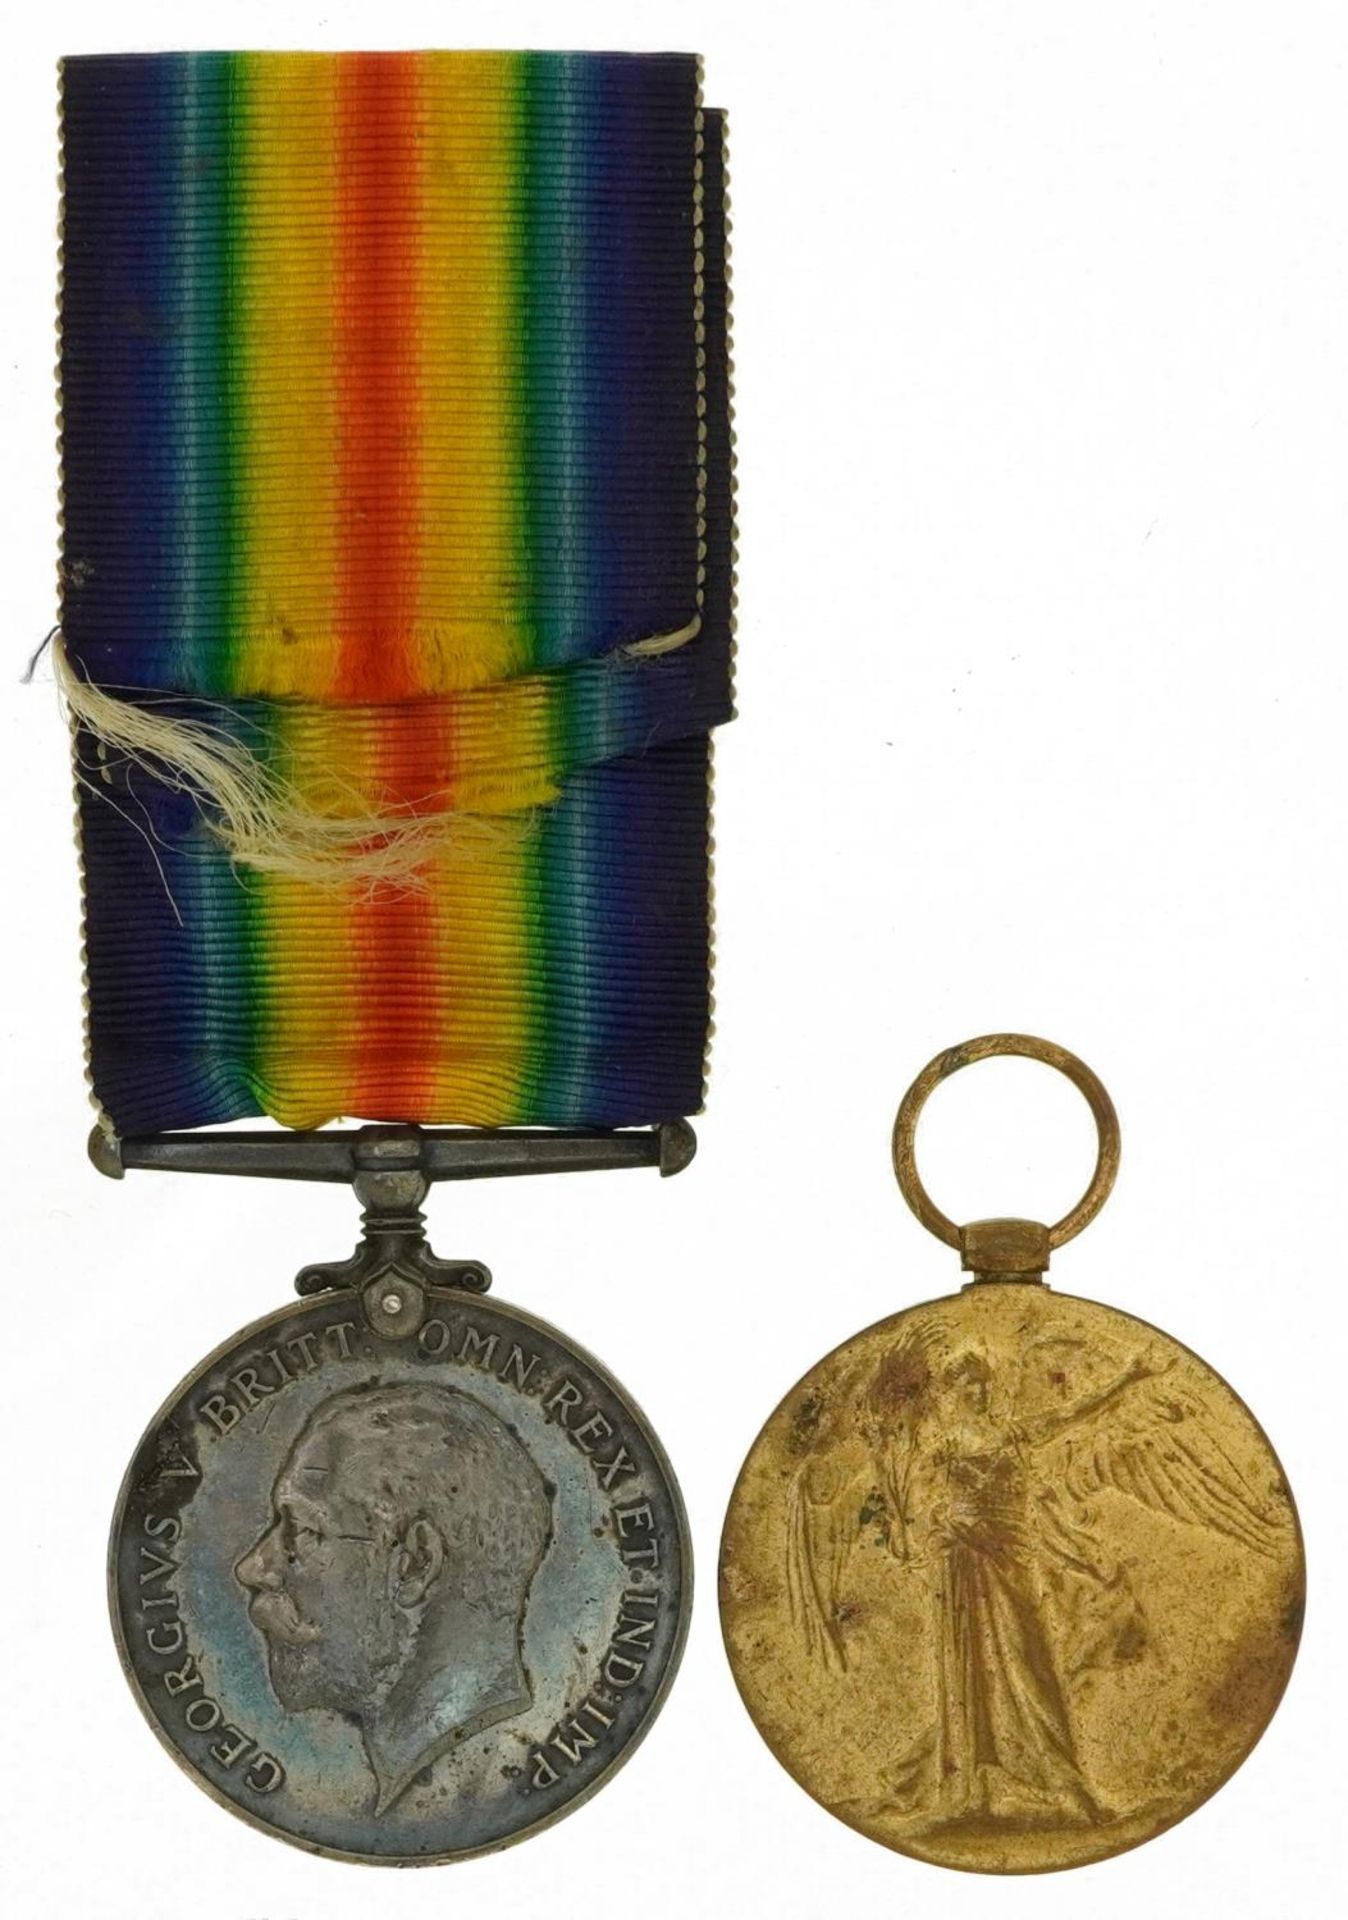 British military World War I pair awarded to 5250SJT.J.FOSTER.N.G.D - Image 2 of 5